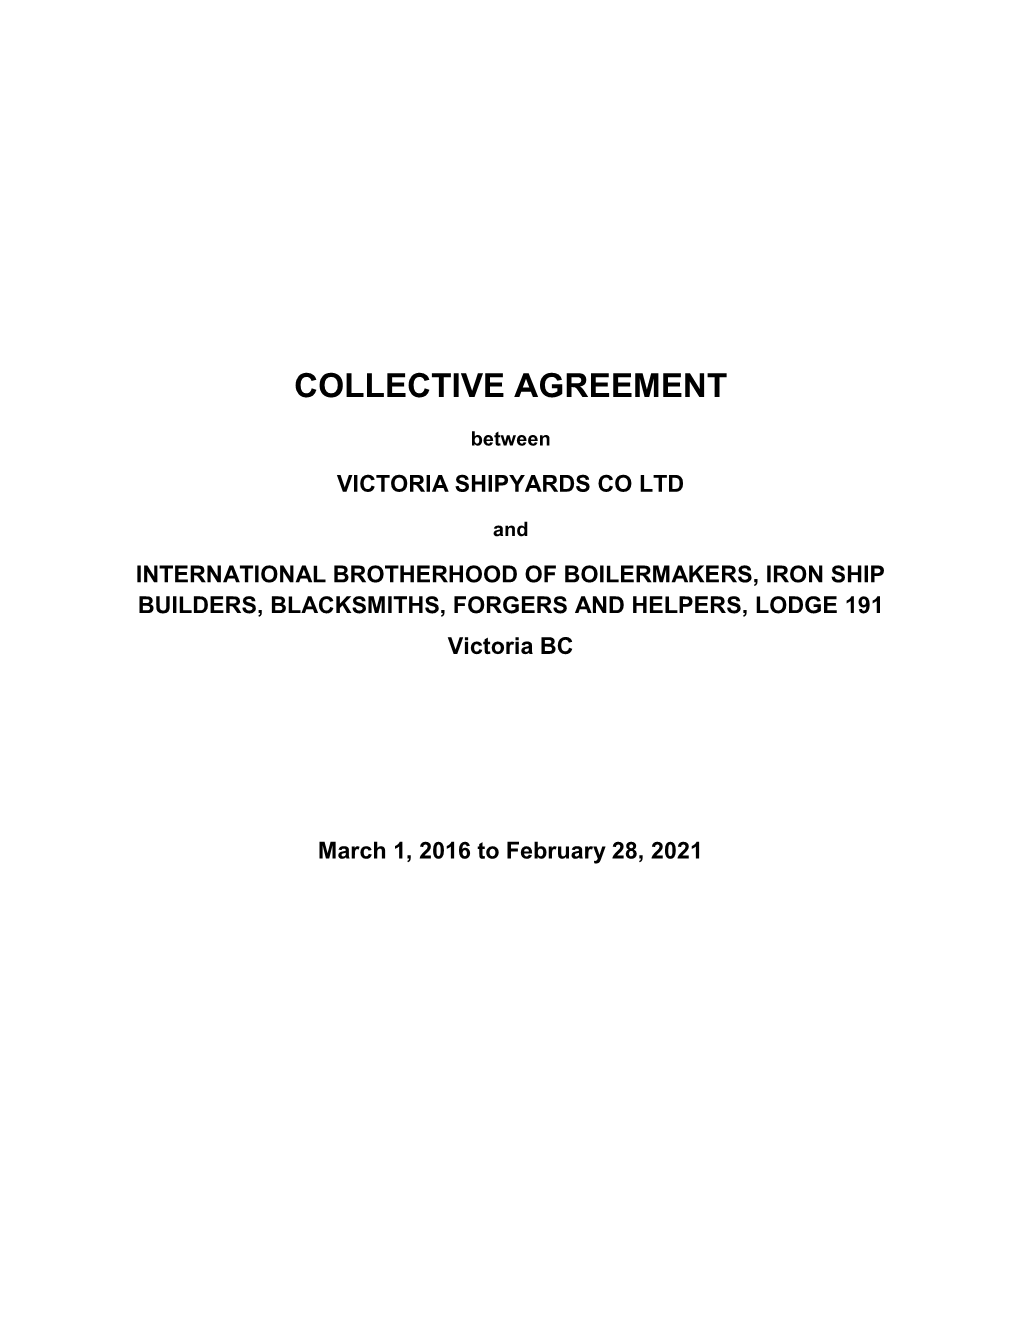 Victoria Shipyards Collective Agreement